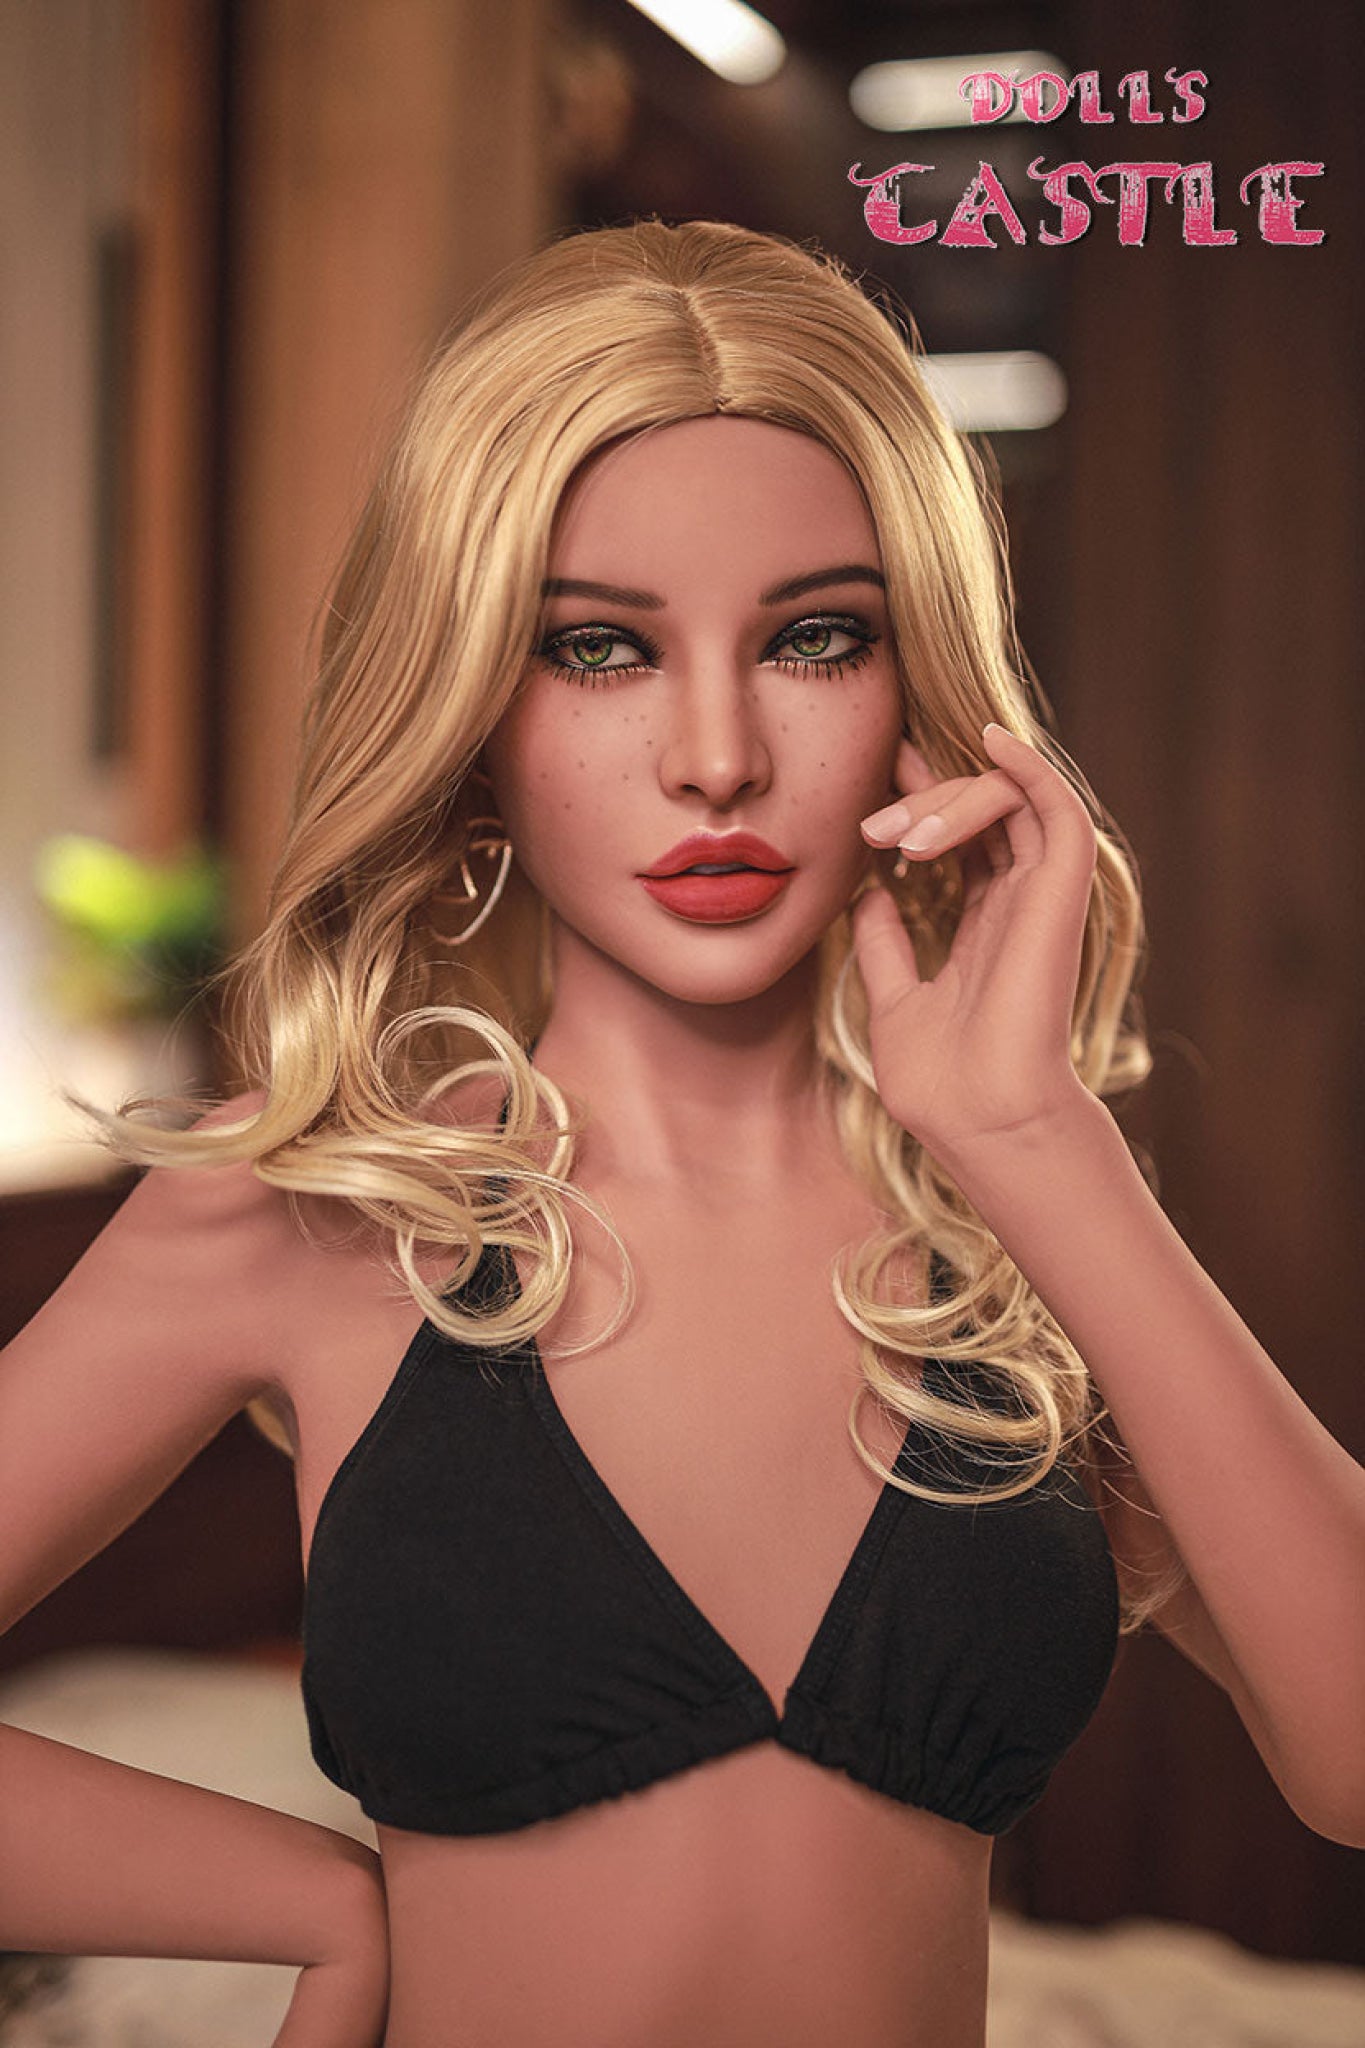 Iracone Cheap Female Sex Doll - Doll's Castle Doll's Castle